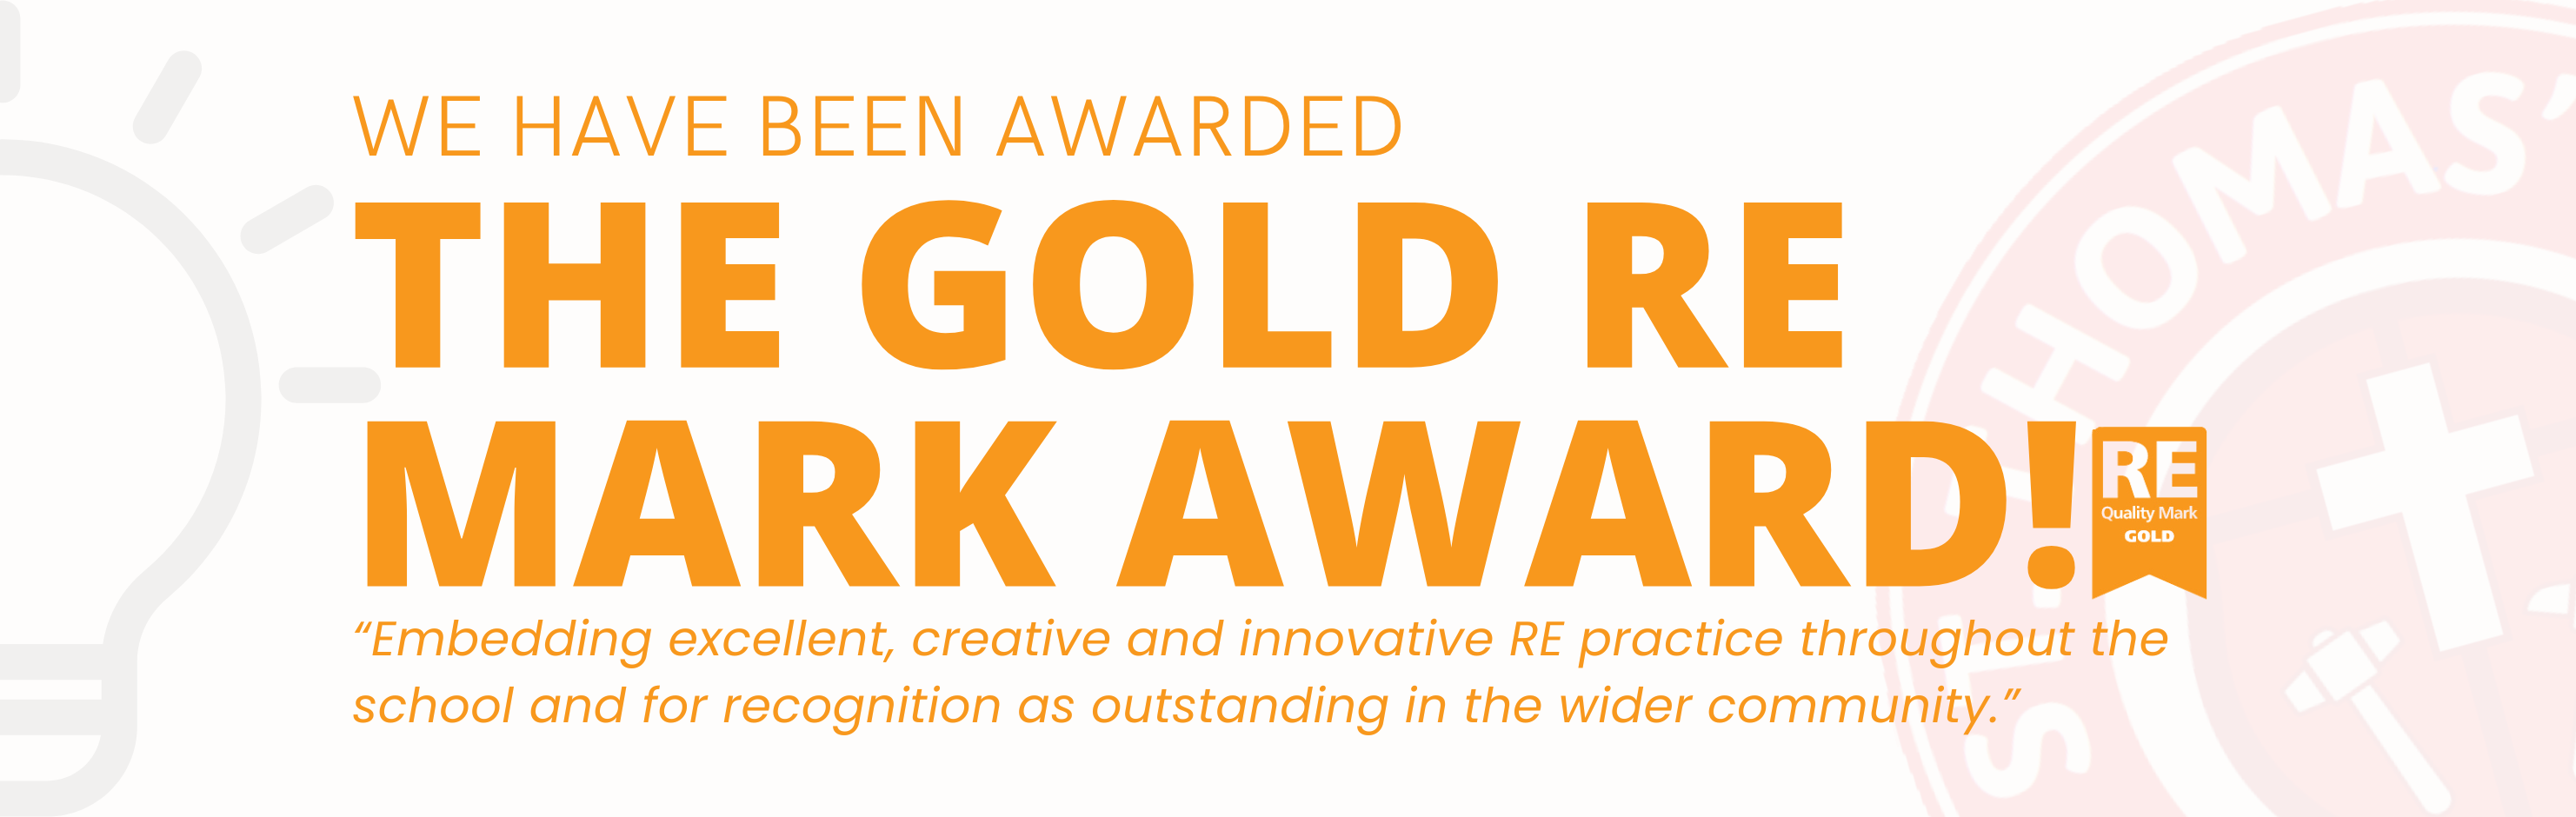 We've been awarded the Gold RE mark!